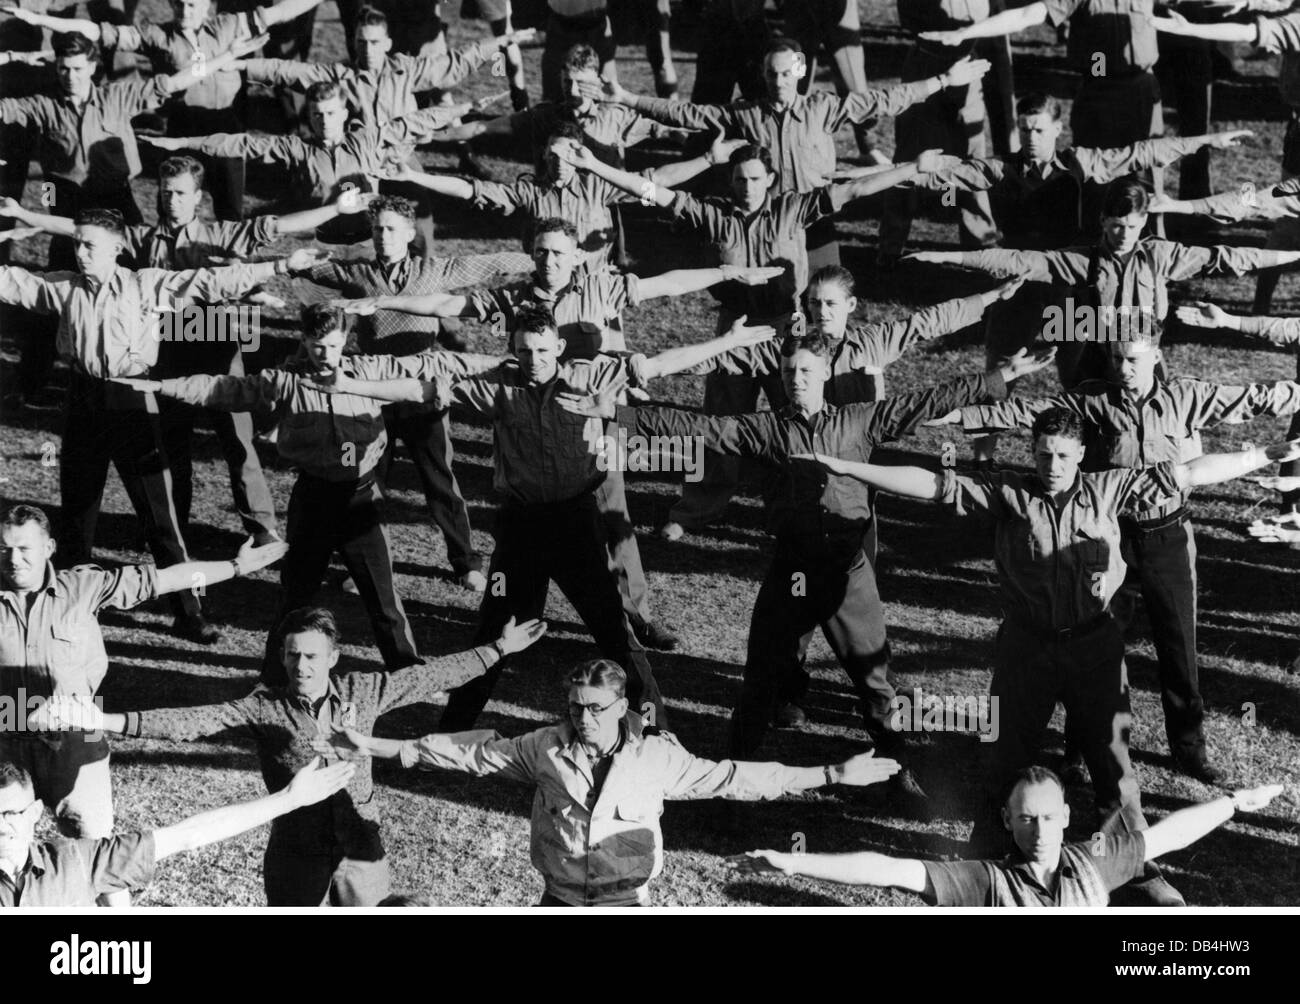 military, Australia, army, basic training, recruits, still wearing civilian clothes, during gymnastics, early-morning exercise, sports, soldiers, soldier, Second World War / WWII, ally, the Allies, Commonwealth, troop, troops, armed forces, defence system, army, armies, military service, military duty, general conscription, 20th century, Australian, Aussie, Australians, Aussies, mobilization, historic, historical, people, 1930s, 1940s, Additional-Rights-Clearences-Not Available Stock Photo